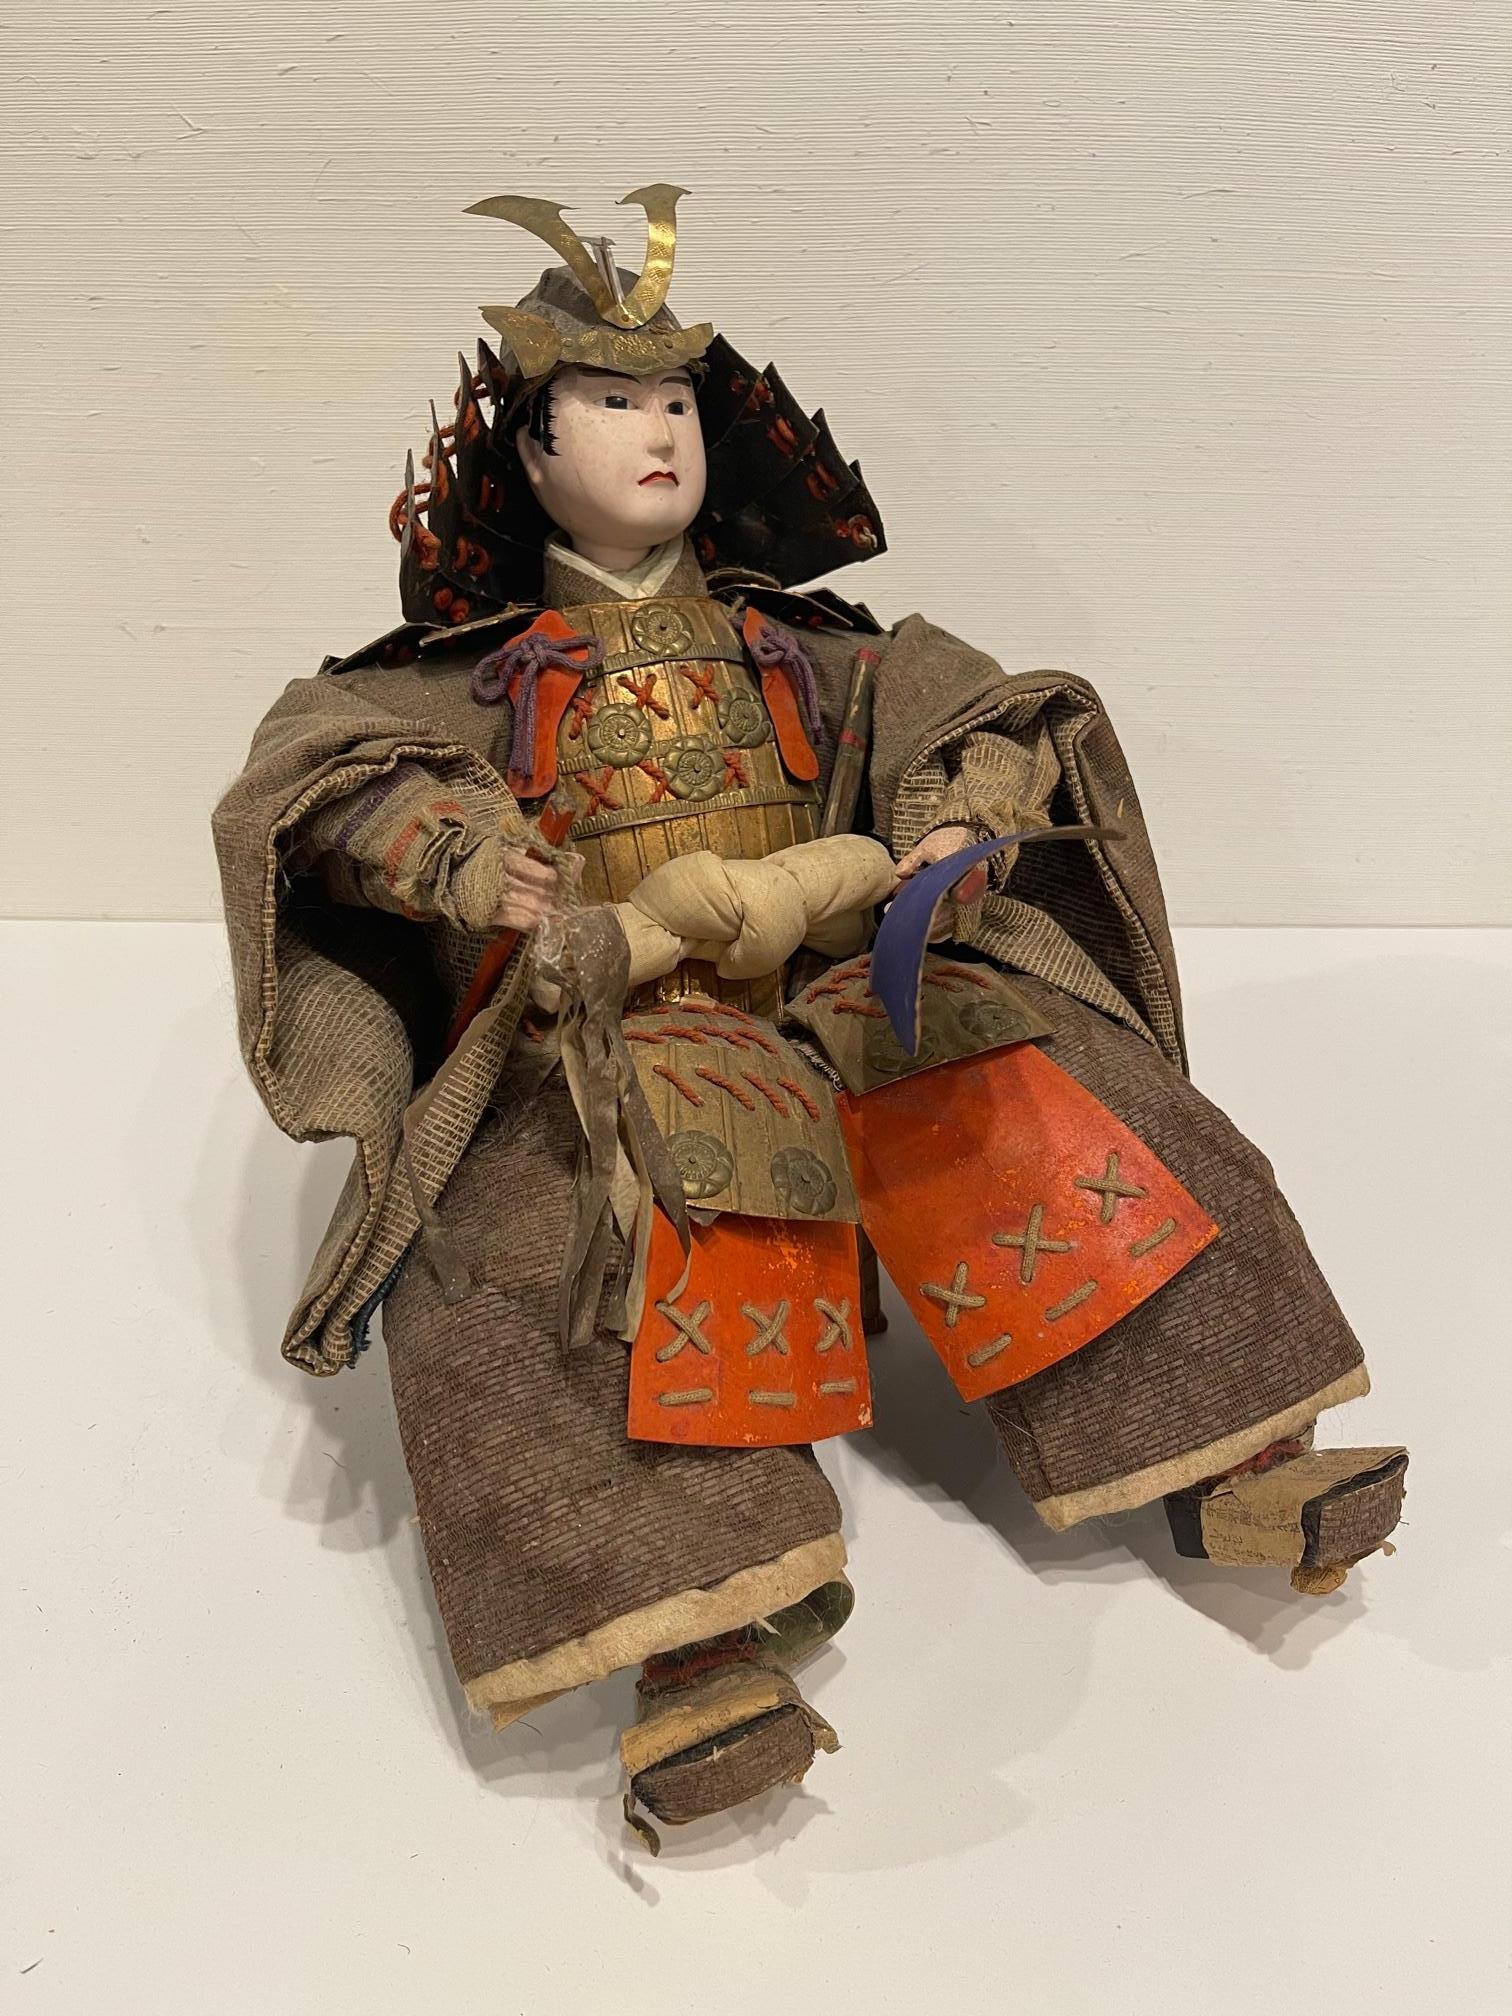 Japanese Samurai doll or figure, Meiji period, Circa 1870s. Beige and brown jacket colors.
  